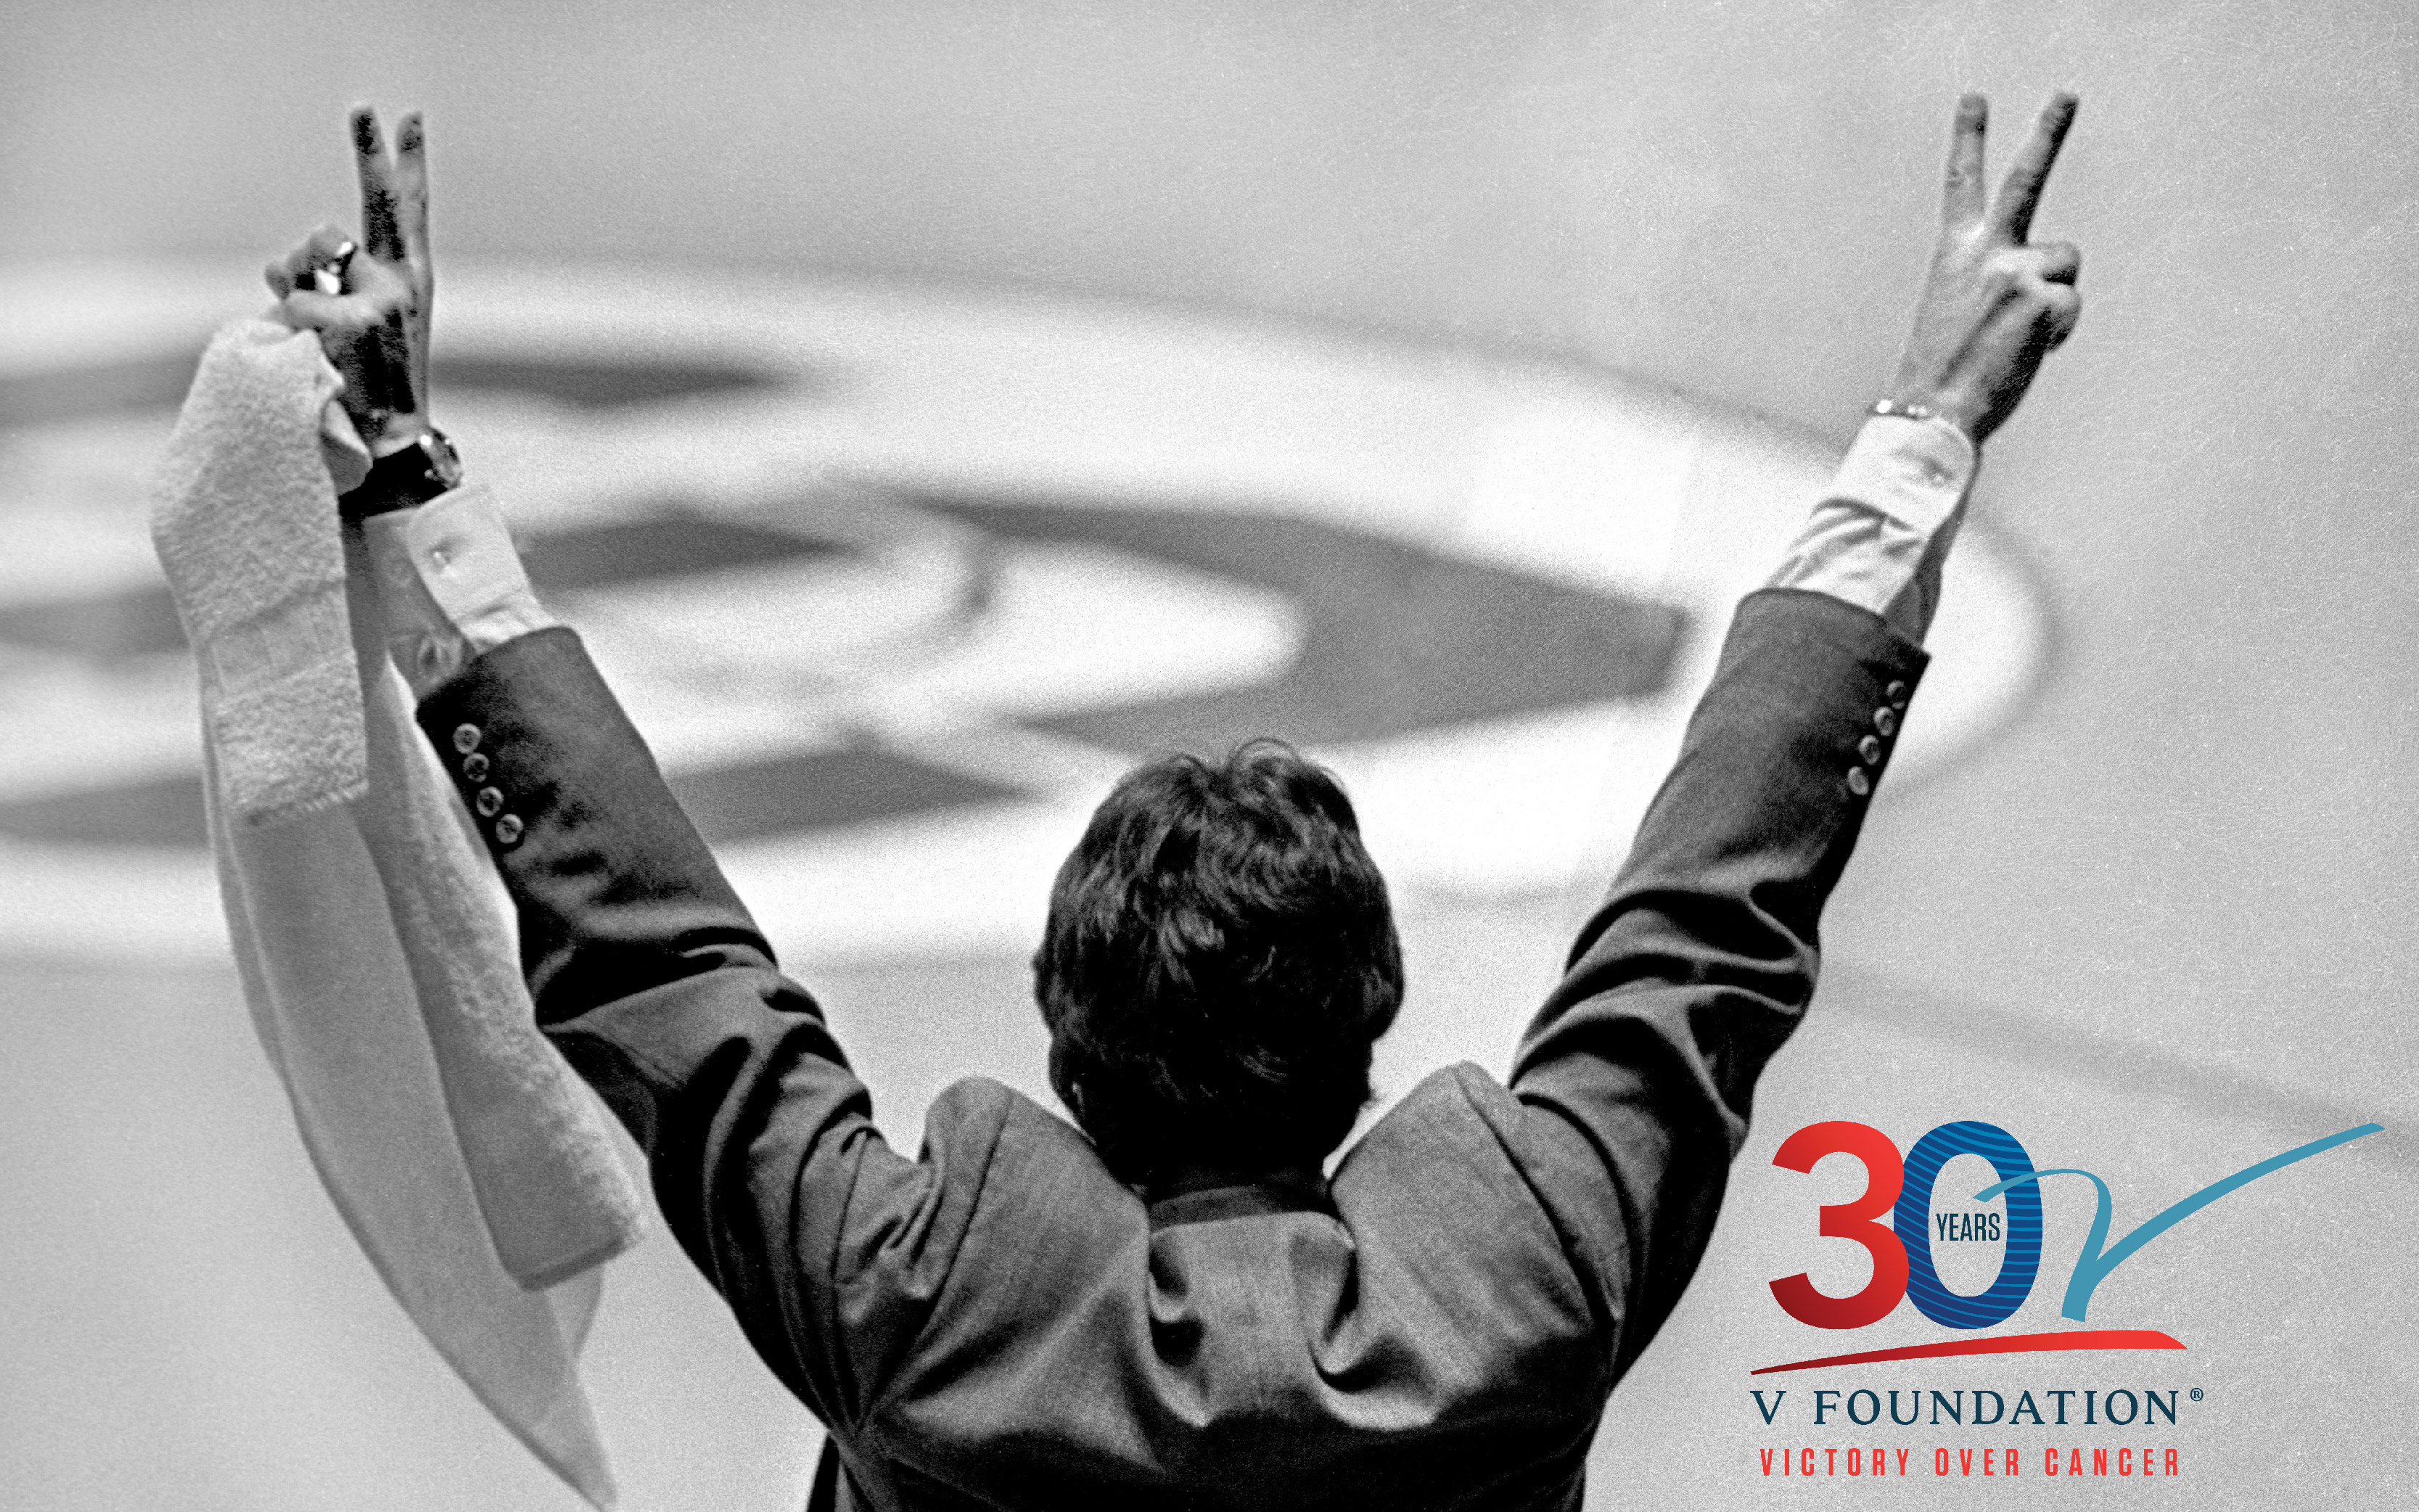 Photo of Jim Valvano from the back holding both hands high with his fingers in a "V" for Victory, and the V Foundation 30th Anniversary logo